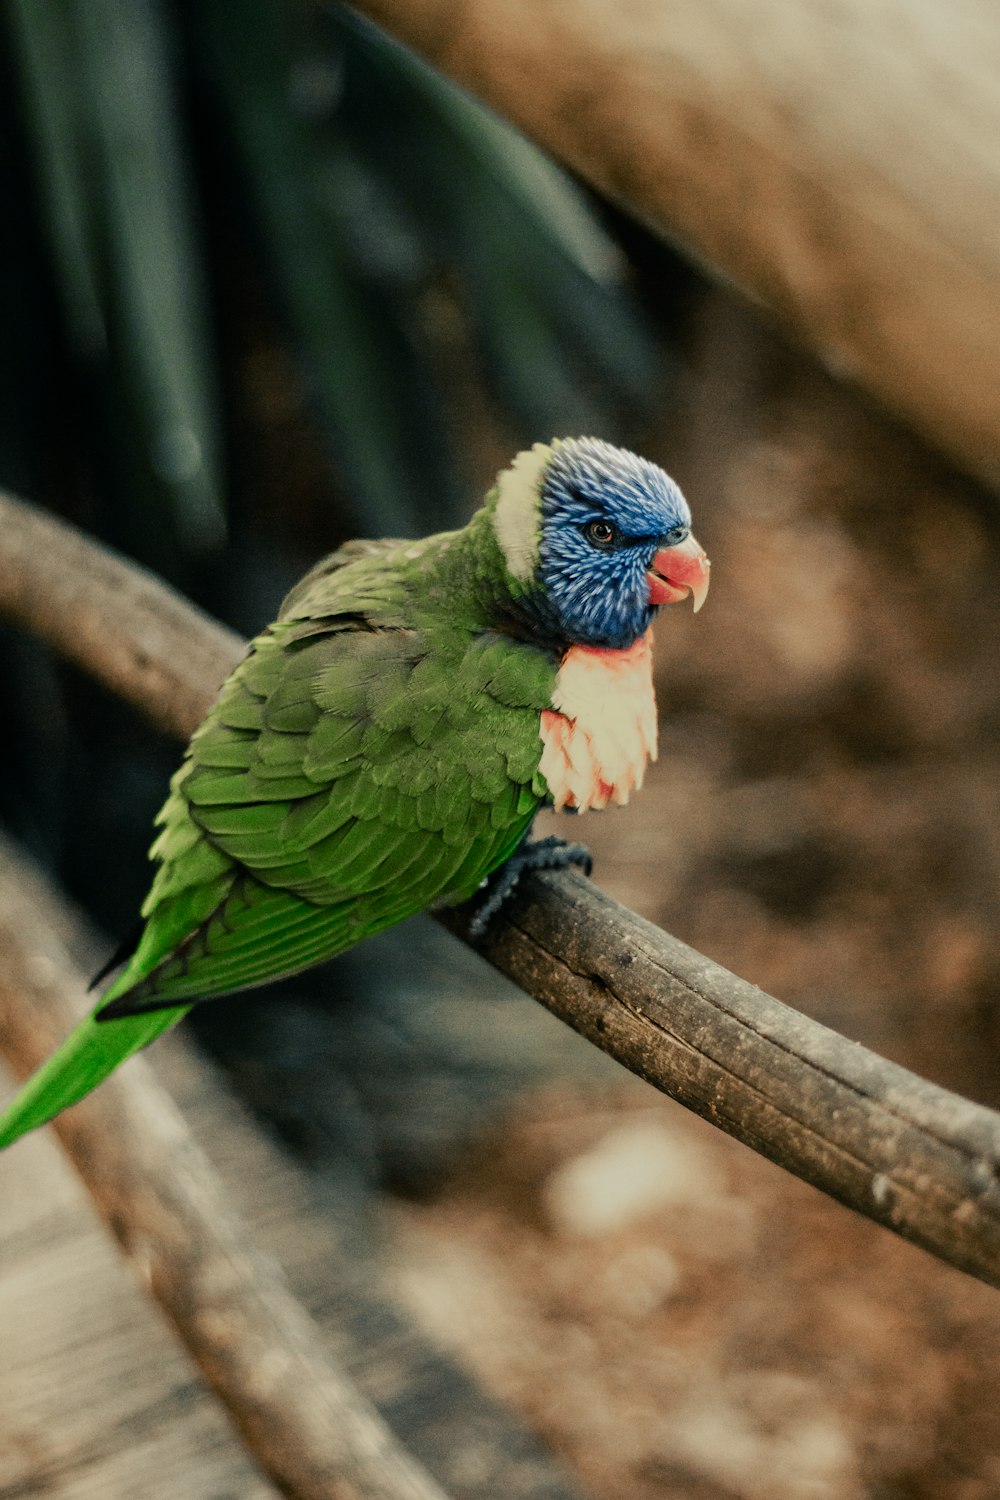 a colorful bird perched on a branch of a tree